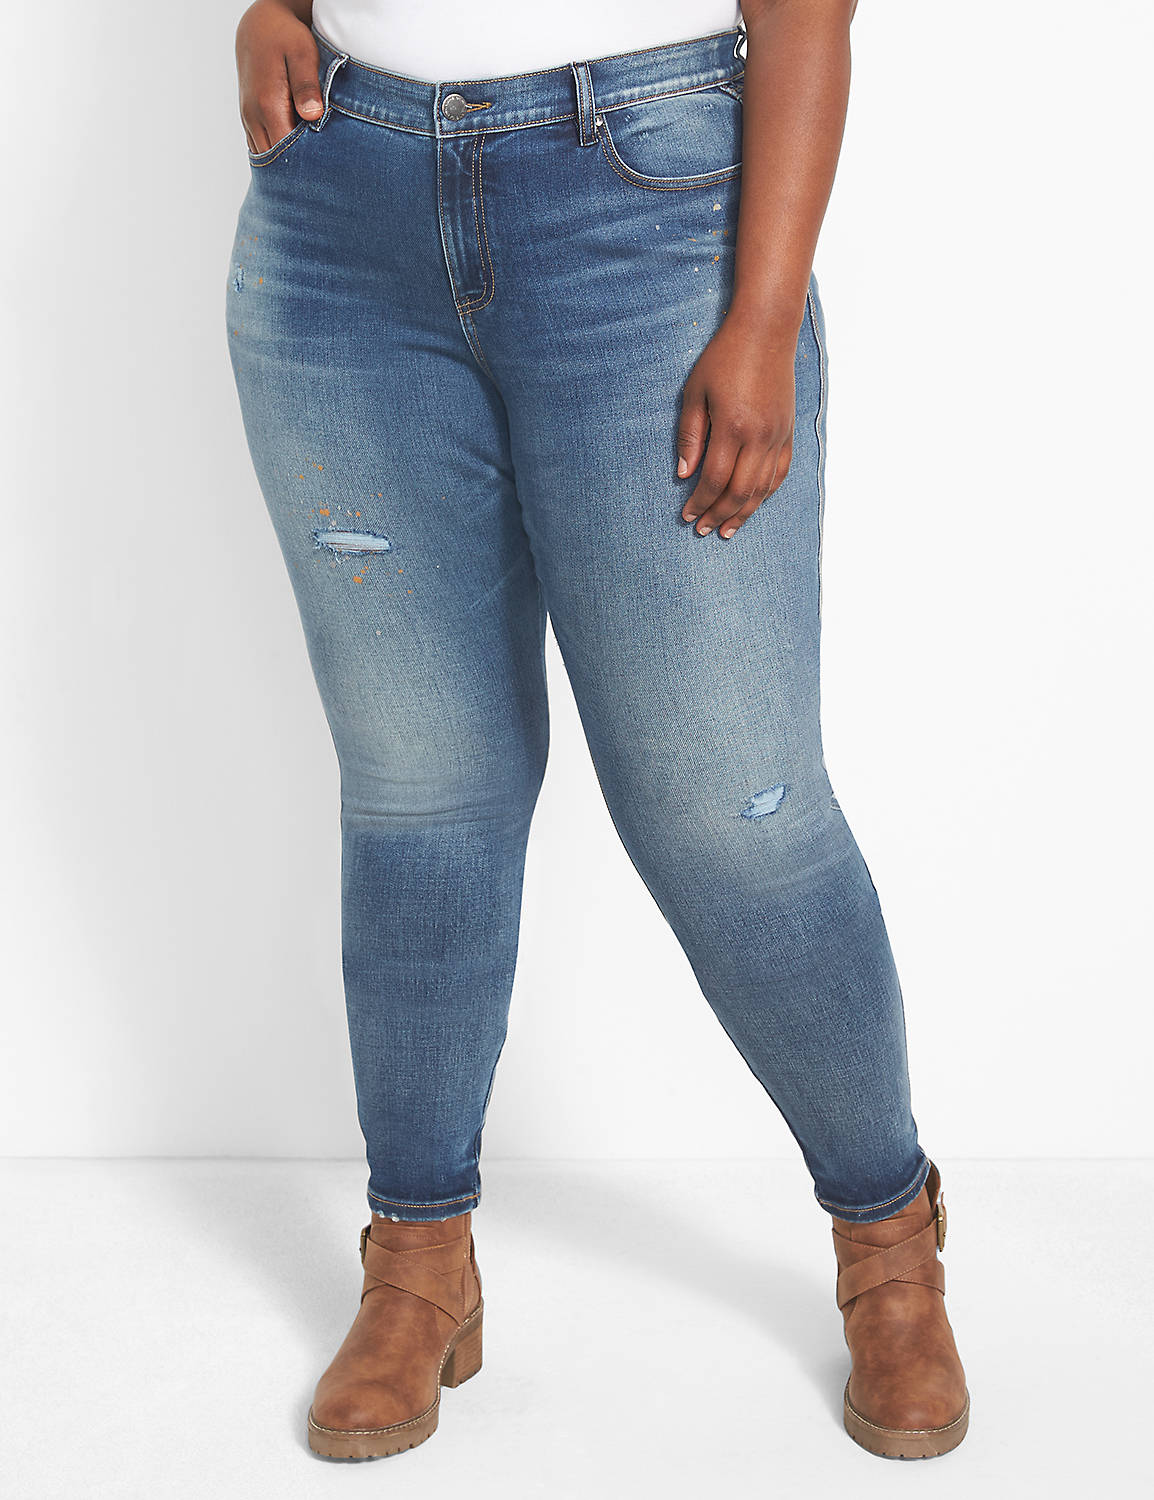 Curvy Fit Body Icon High-Rise Skinny Jean - Medium Wash With Gold Paint  Splatter | LaneBryant